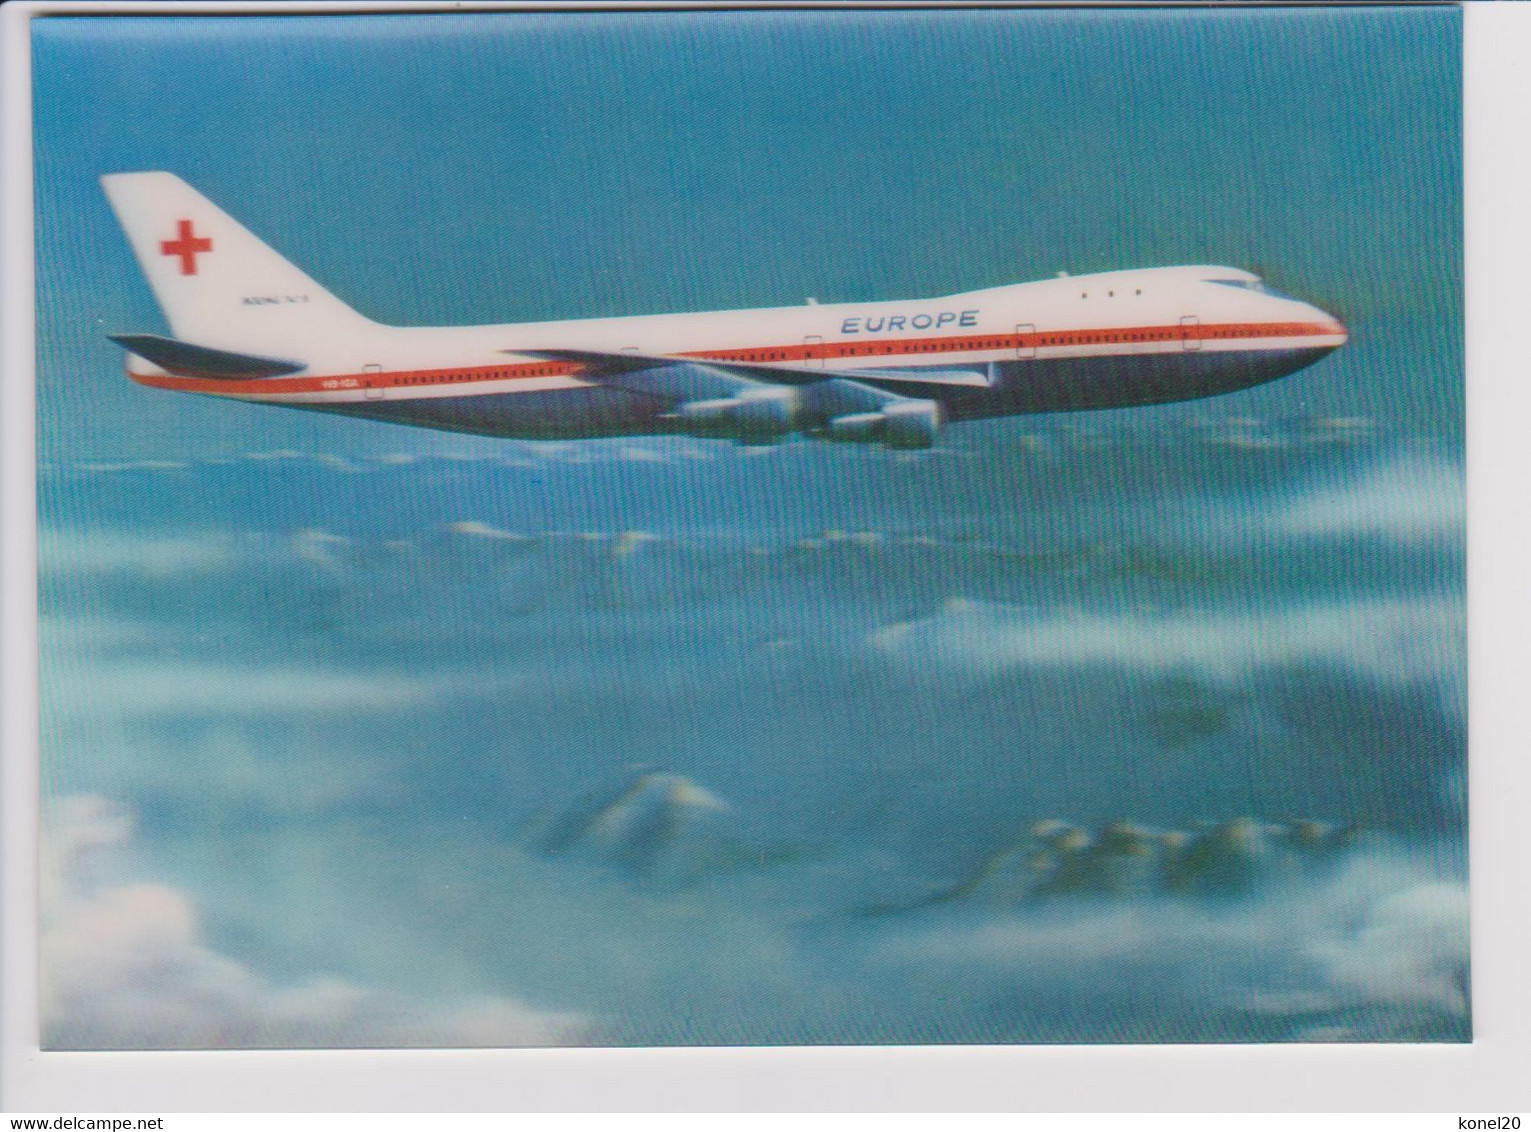 Vintage Holographic 3-D Rppc Boeing 747 Swiss Company Europe - 1919-1938: Entre Guerres